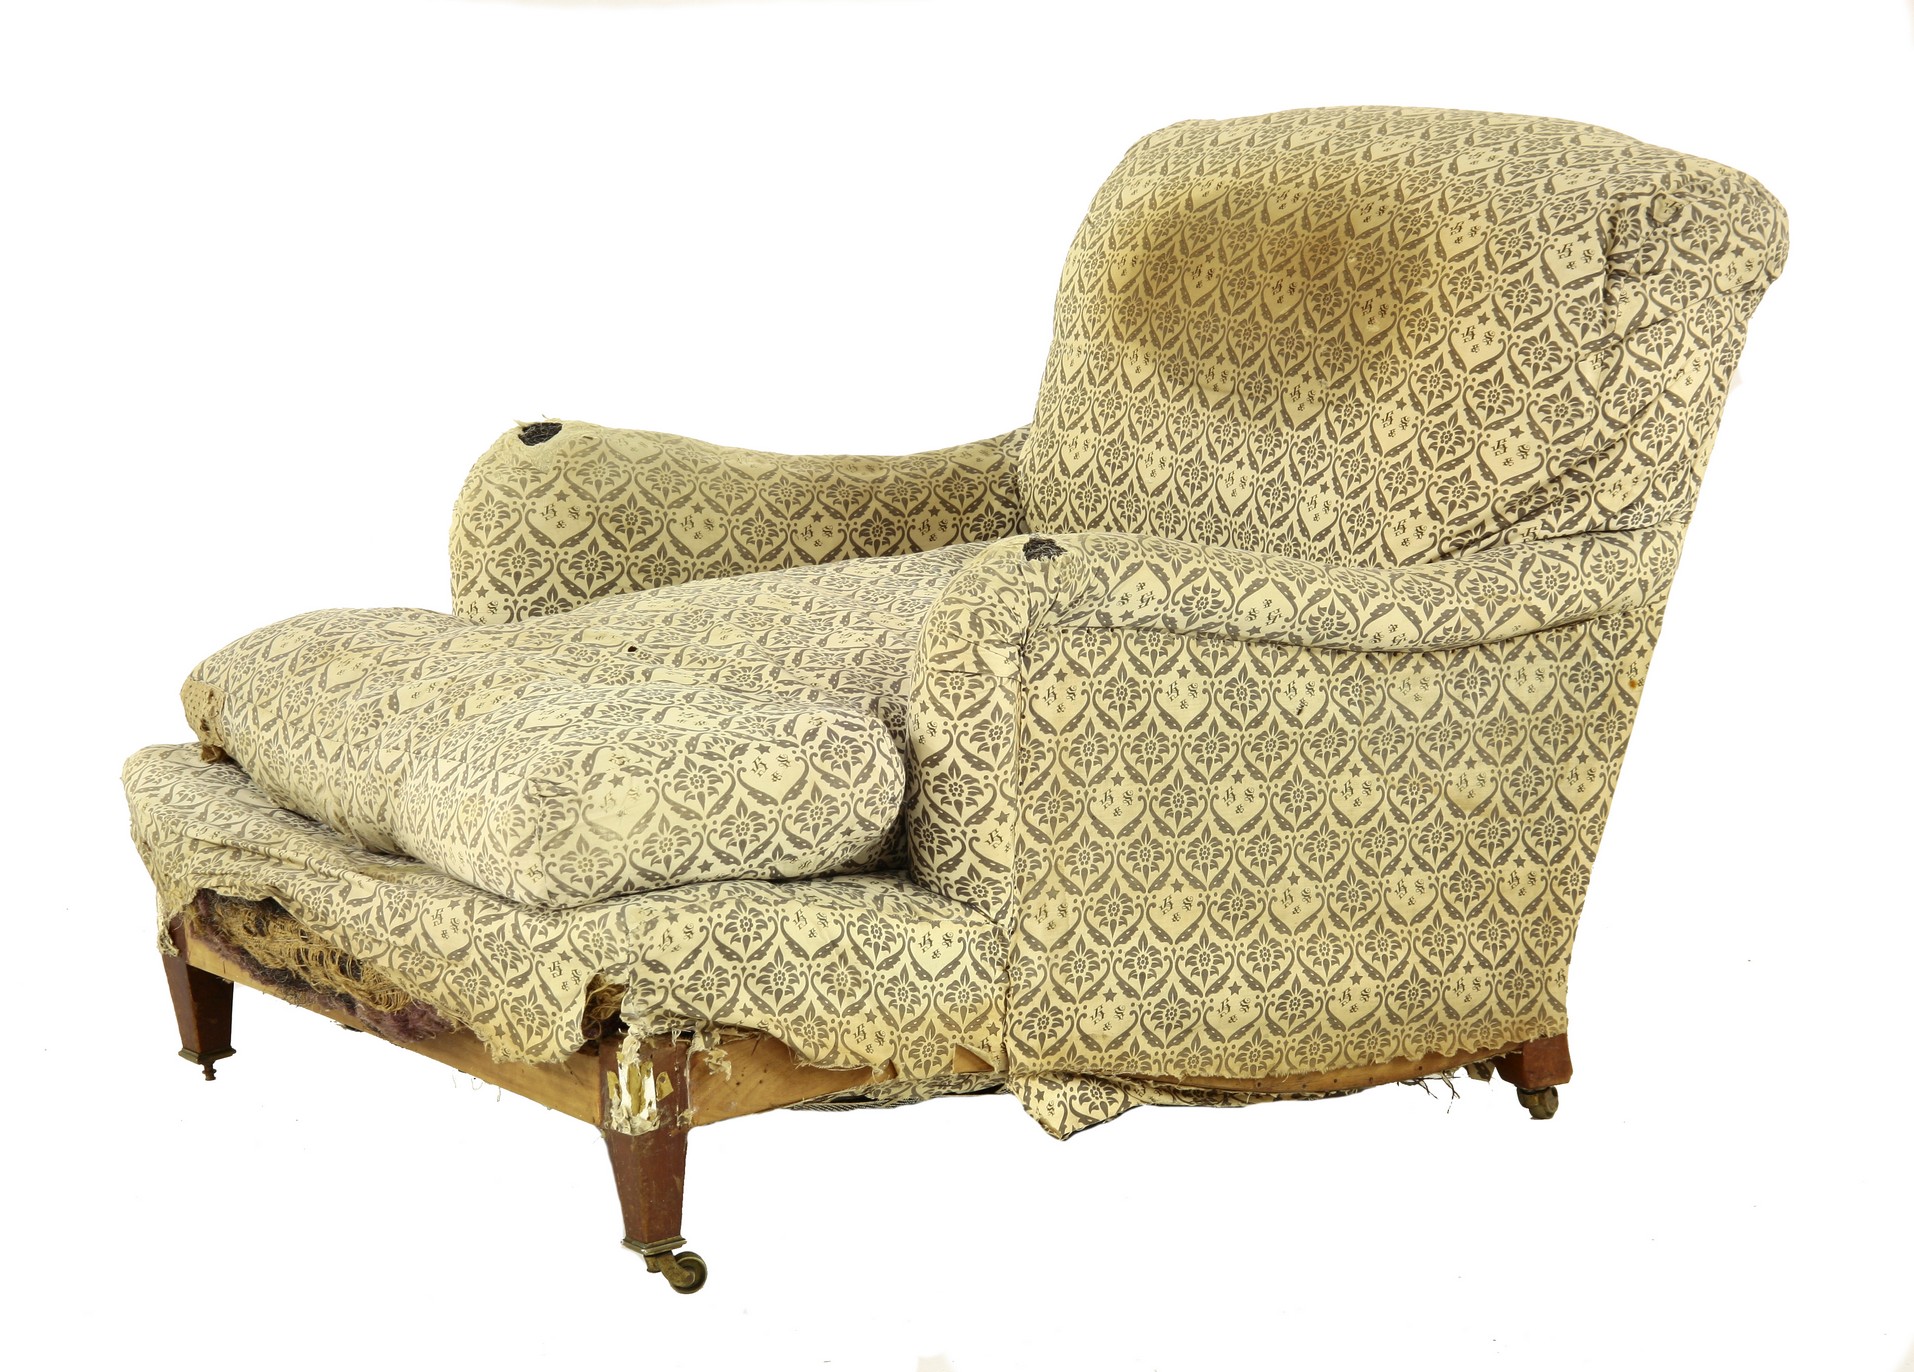 A Howard & Son armchair,
with original H&S printed fabric upholstery, stamped '19636 2303 Howard &